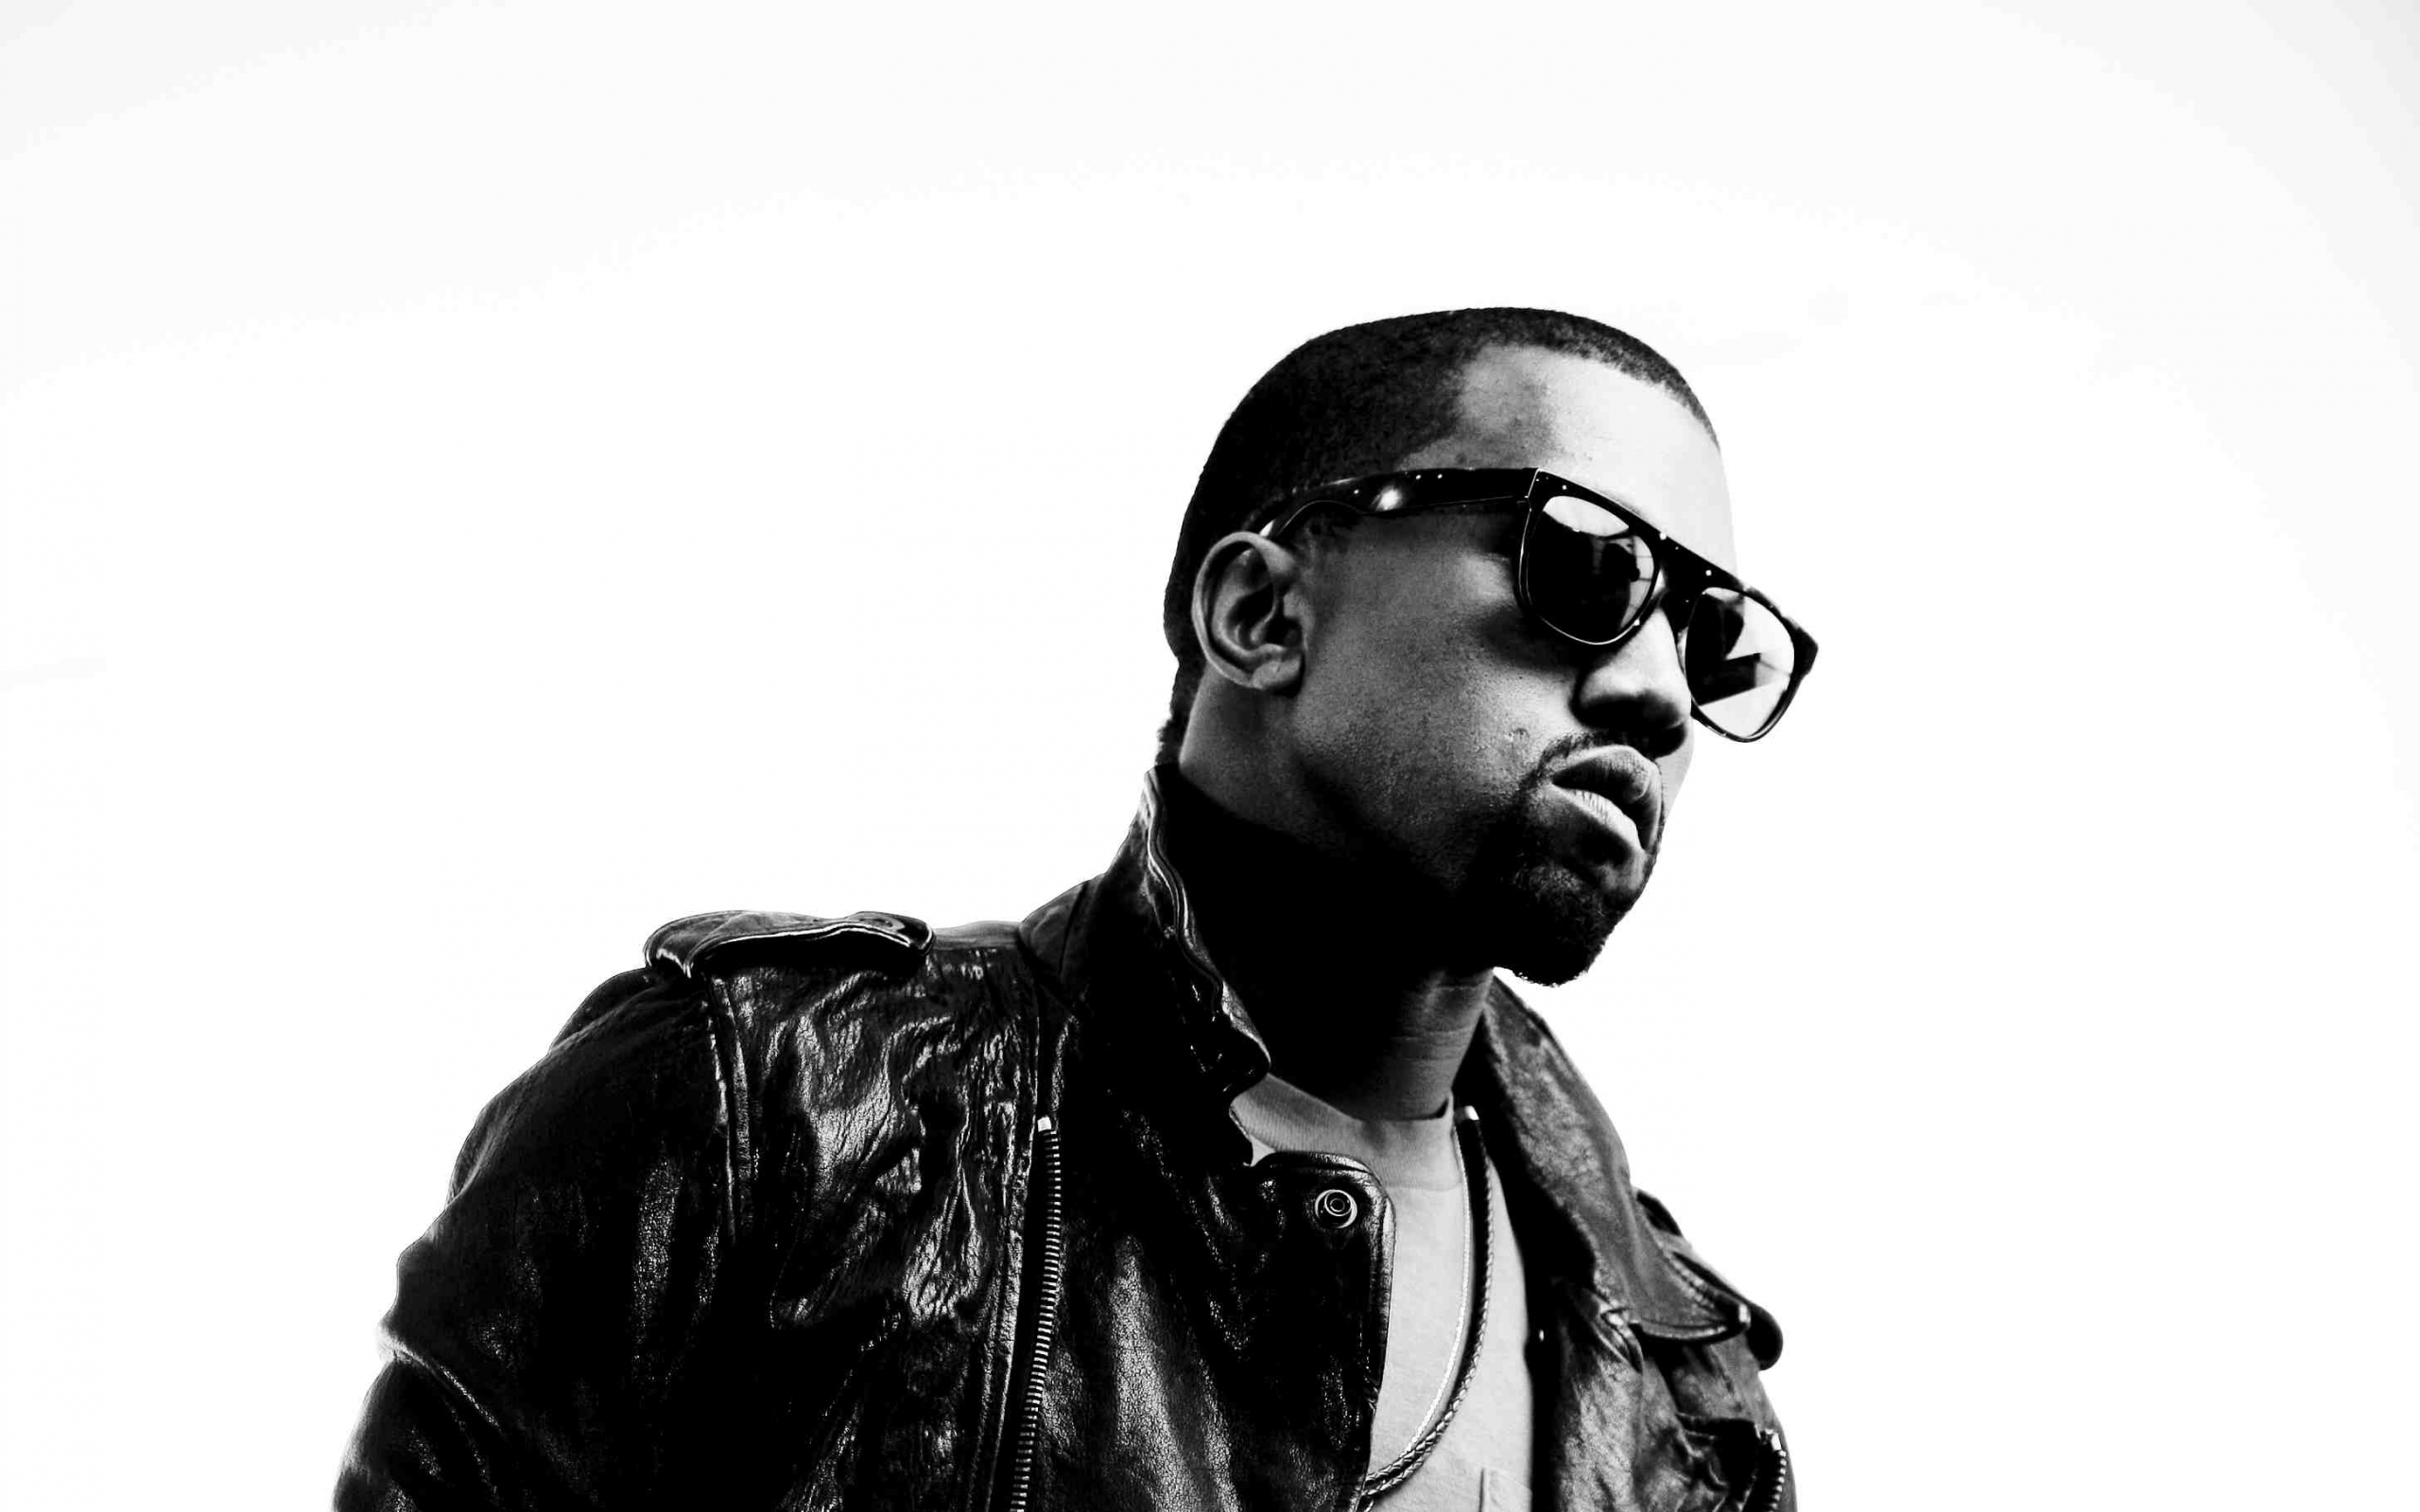 Kanye West HD Wallpaper | Background Image | 2560x1600 | ID:569626 - Wallpaper Abyss